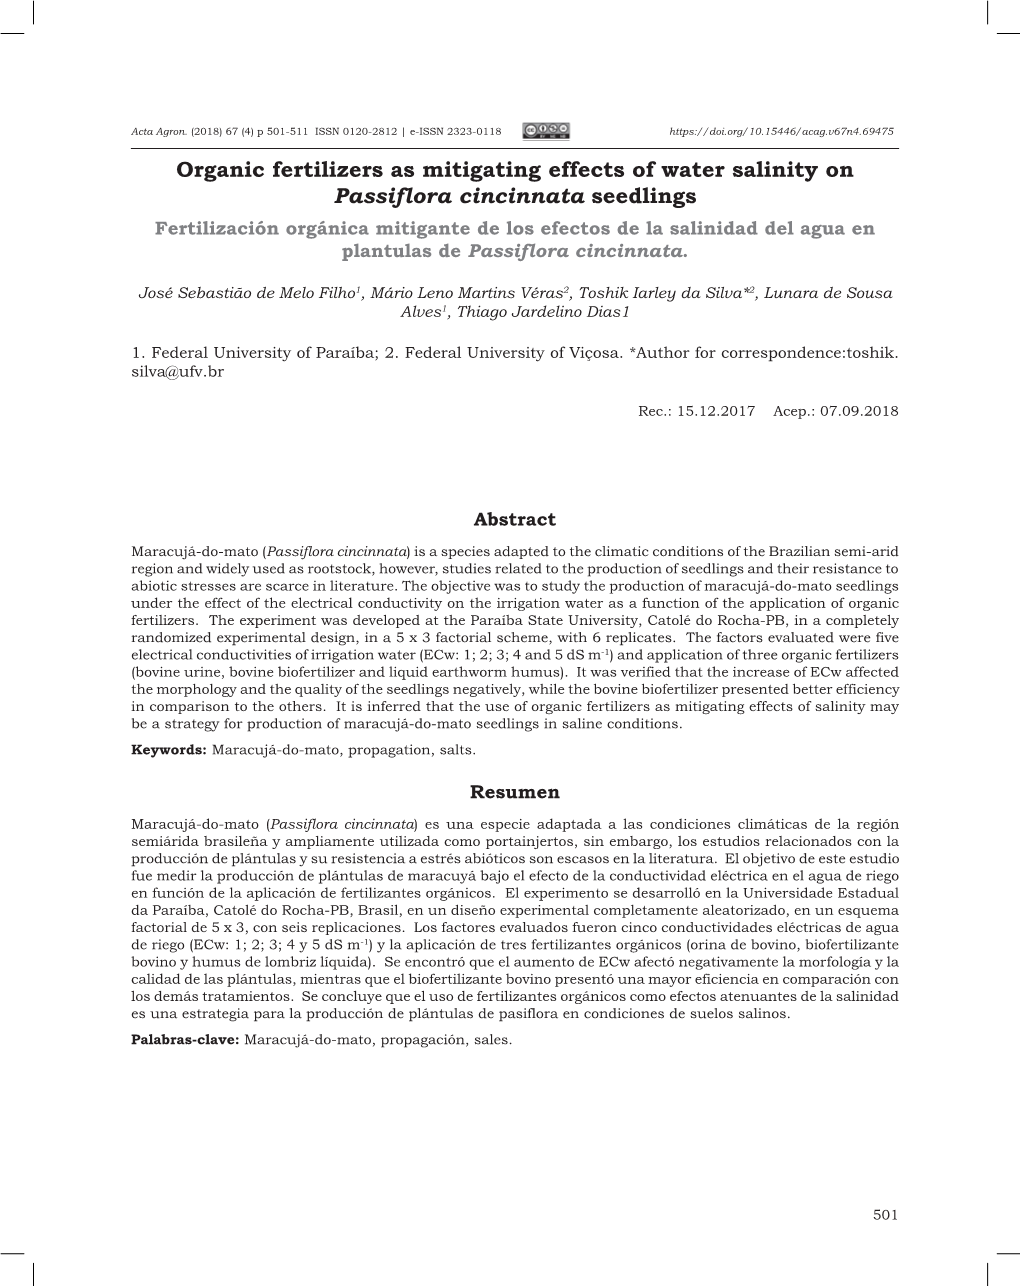 Organic Fertilizers As Mitigating Effects of Water Salinity on Passiflora